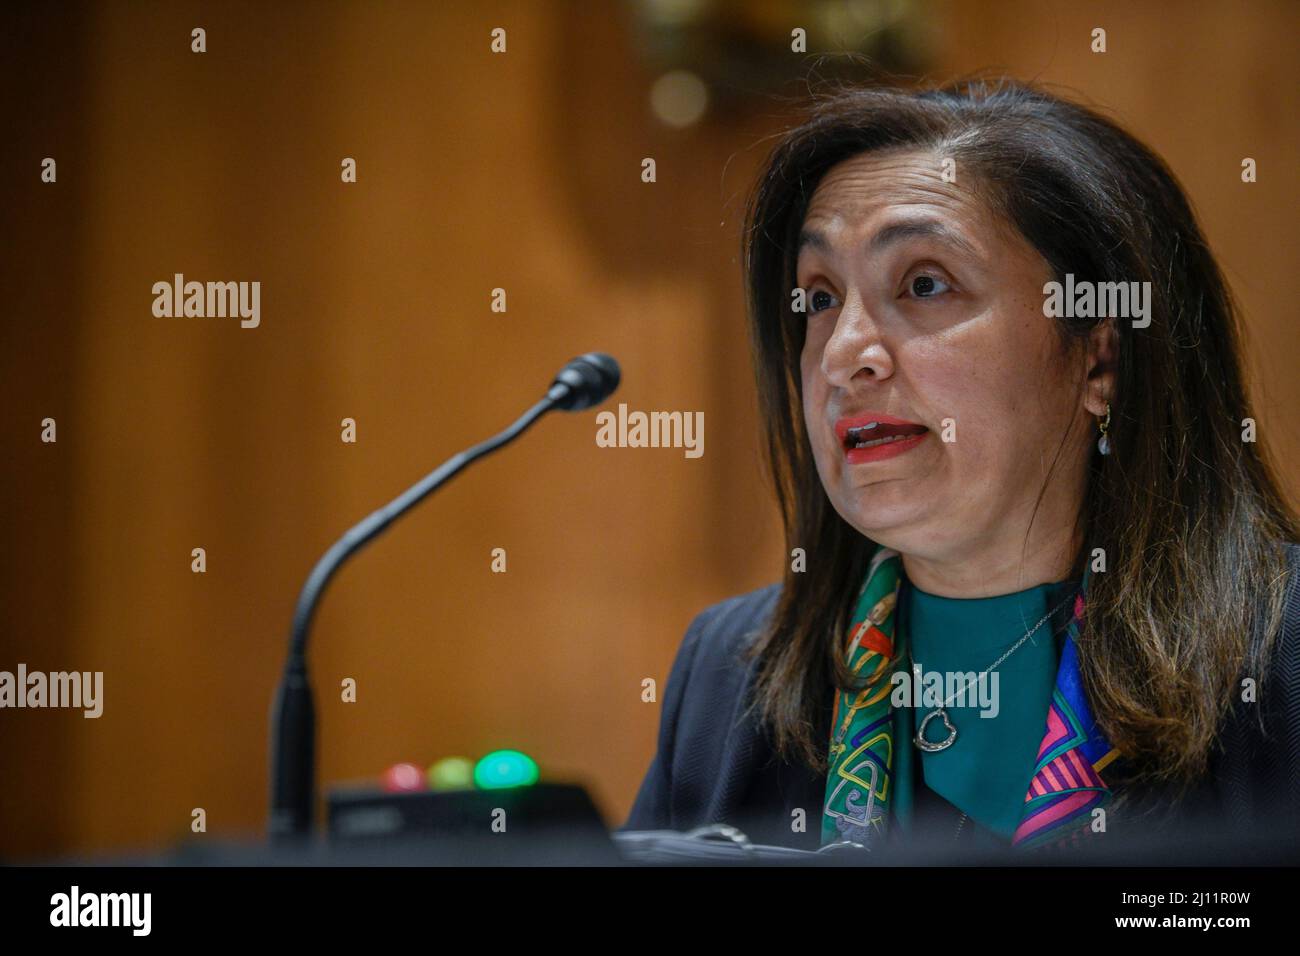 Washington, United States Of America. 15th Mar, 2022. Uzra Zeya, Under Secretary for Civilian Security, Democracy, and Human Rights, U.S. Department of State, appears before a Senate Committee on Foreign Relations hearing to examine combatting authoritarianism, focusing on U.S. tools and responses, in the Dirksen Senate Office Building in Washington, DC, Tuesday, March 15, 2022. Credit: Rod Lamkey/CNP/AdMedia/Newscom/Alamy Live News Stock Photo